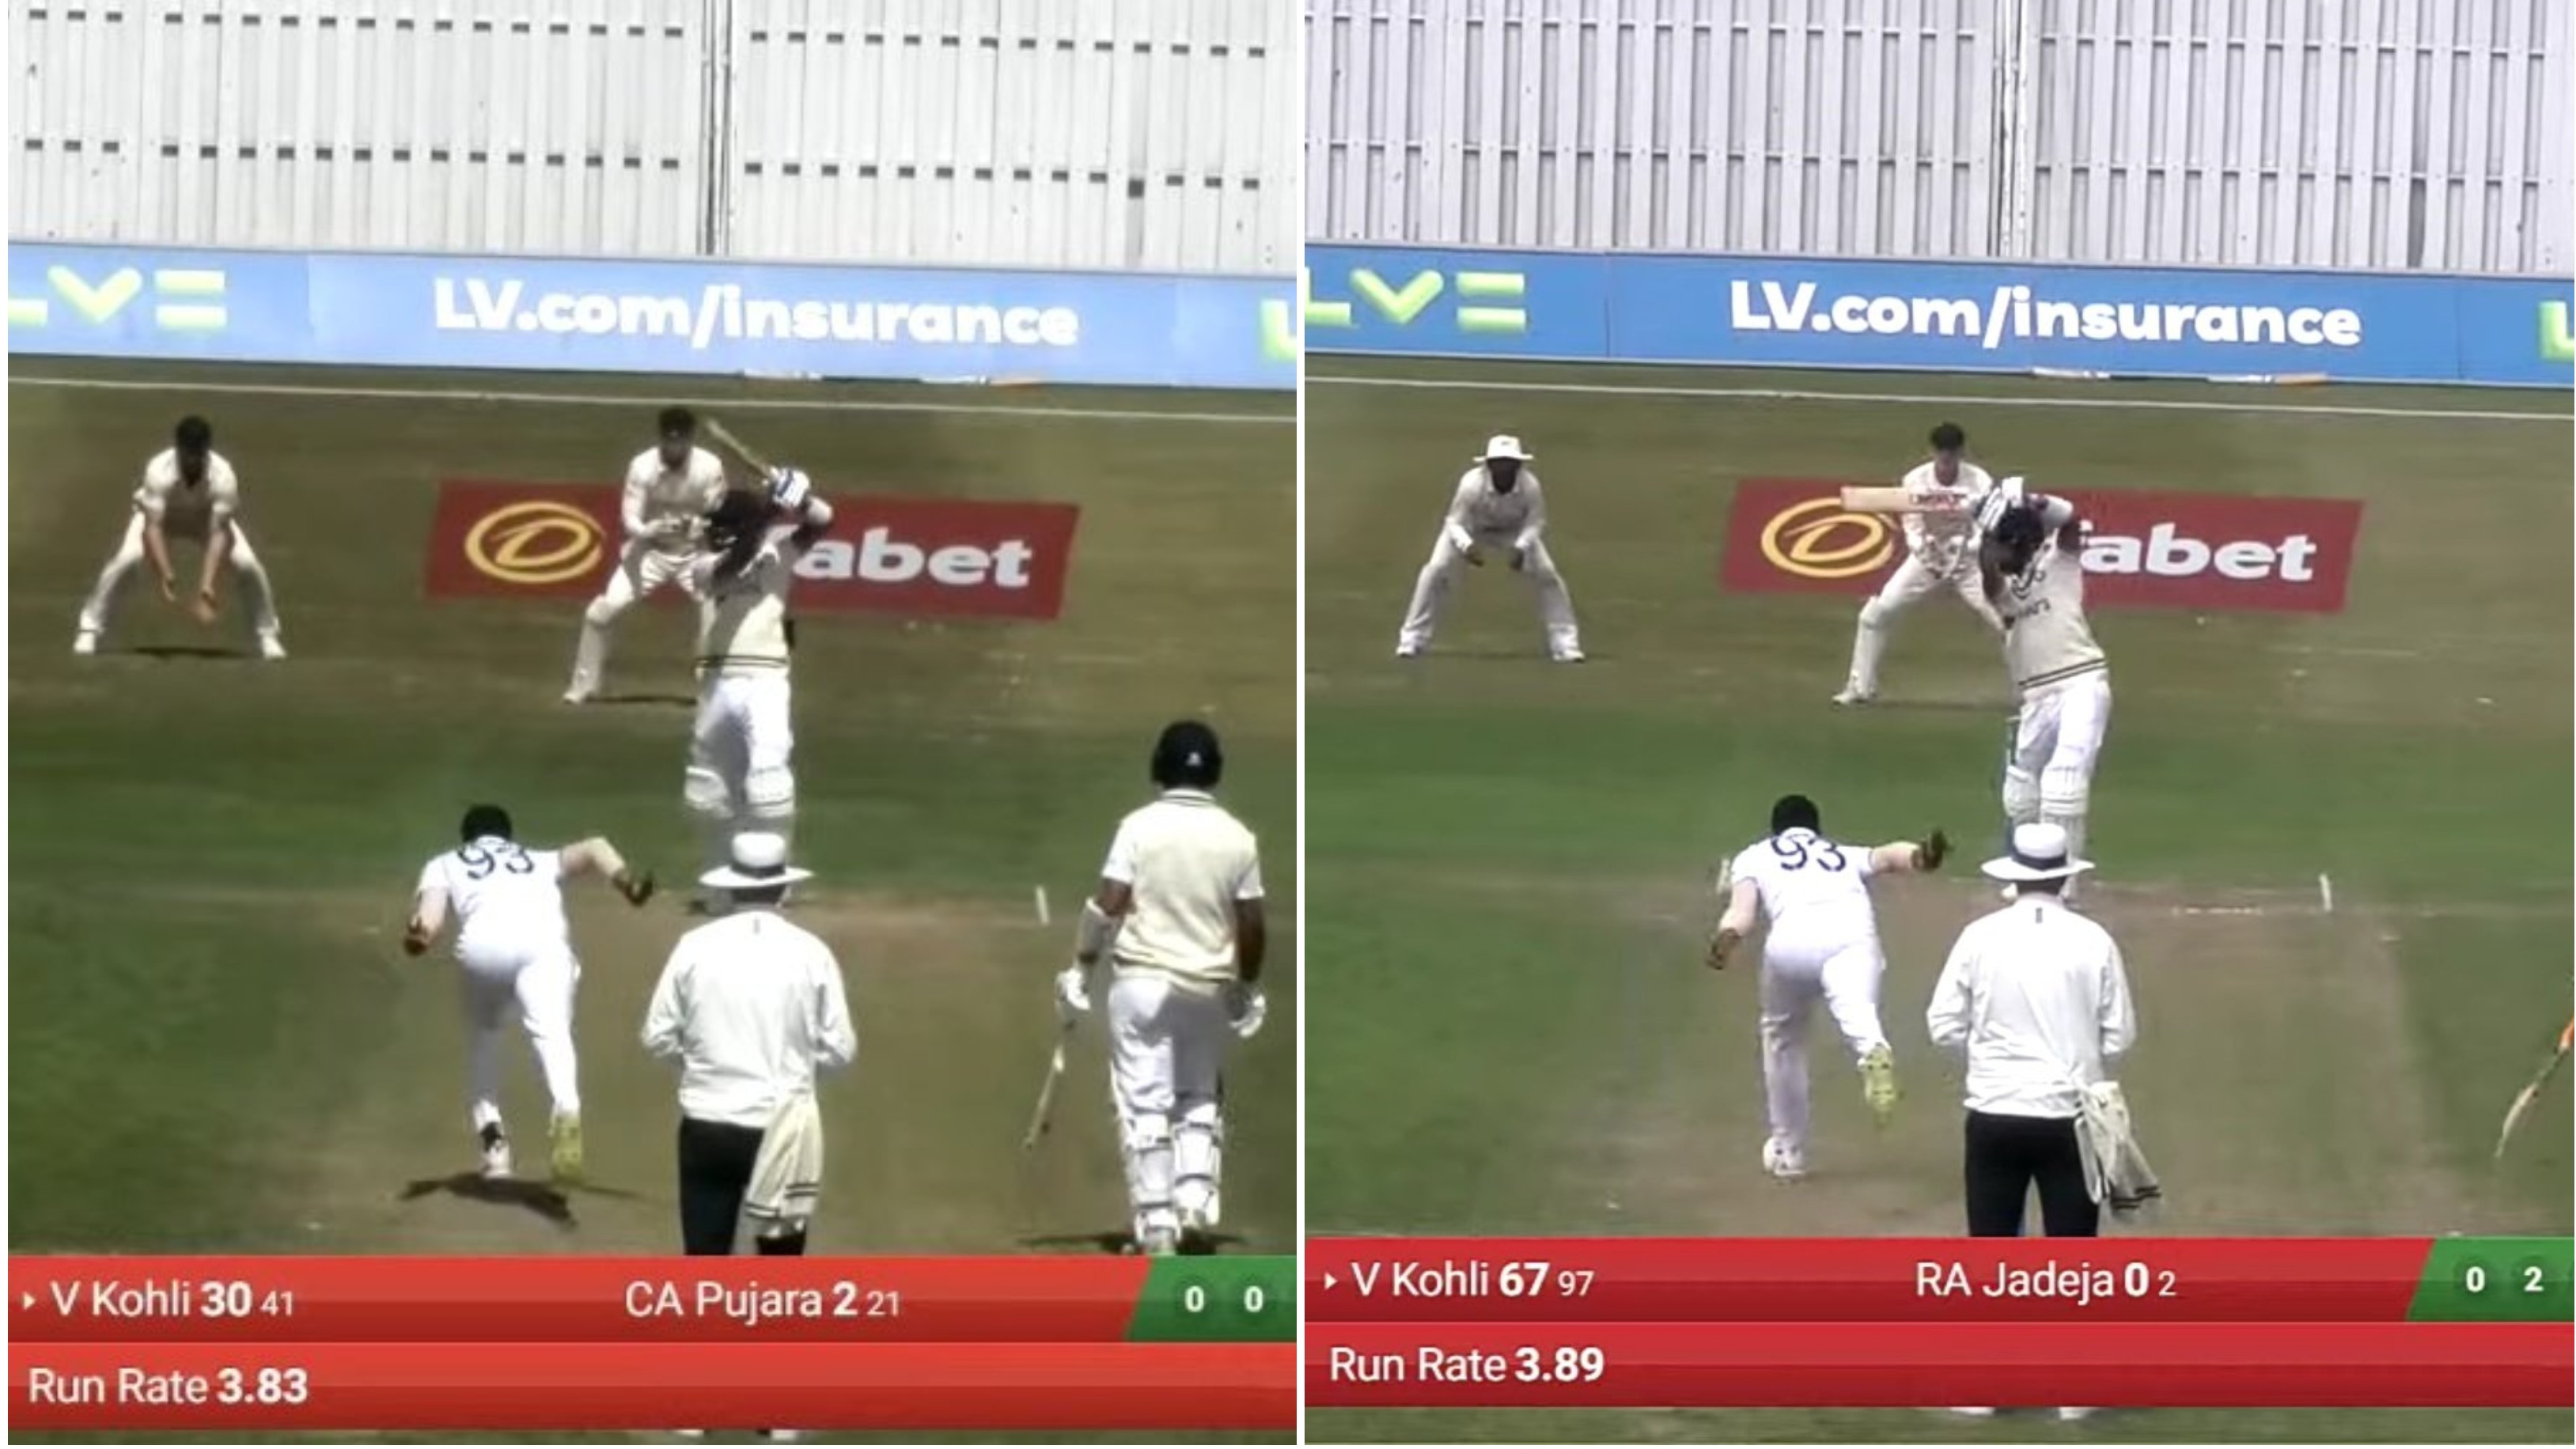 ENG v IND 2022: WATCH – Bumrah gets rid of Kohli in warm-up match after getting smacked for a six earlier